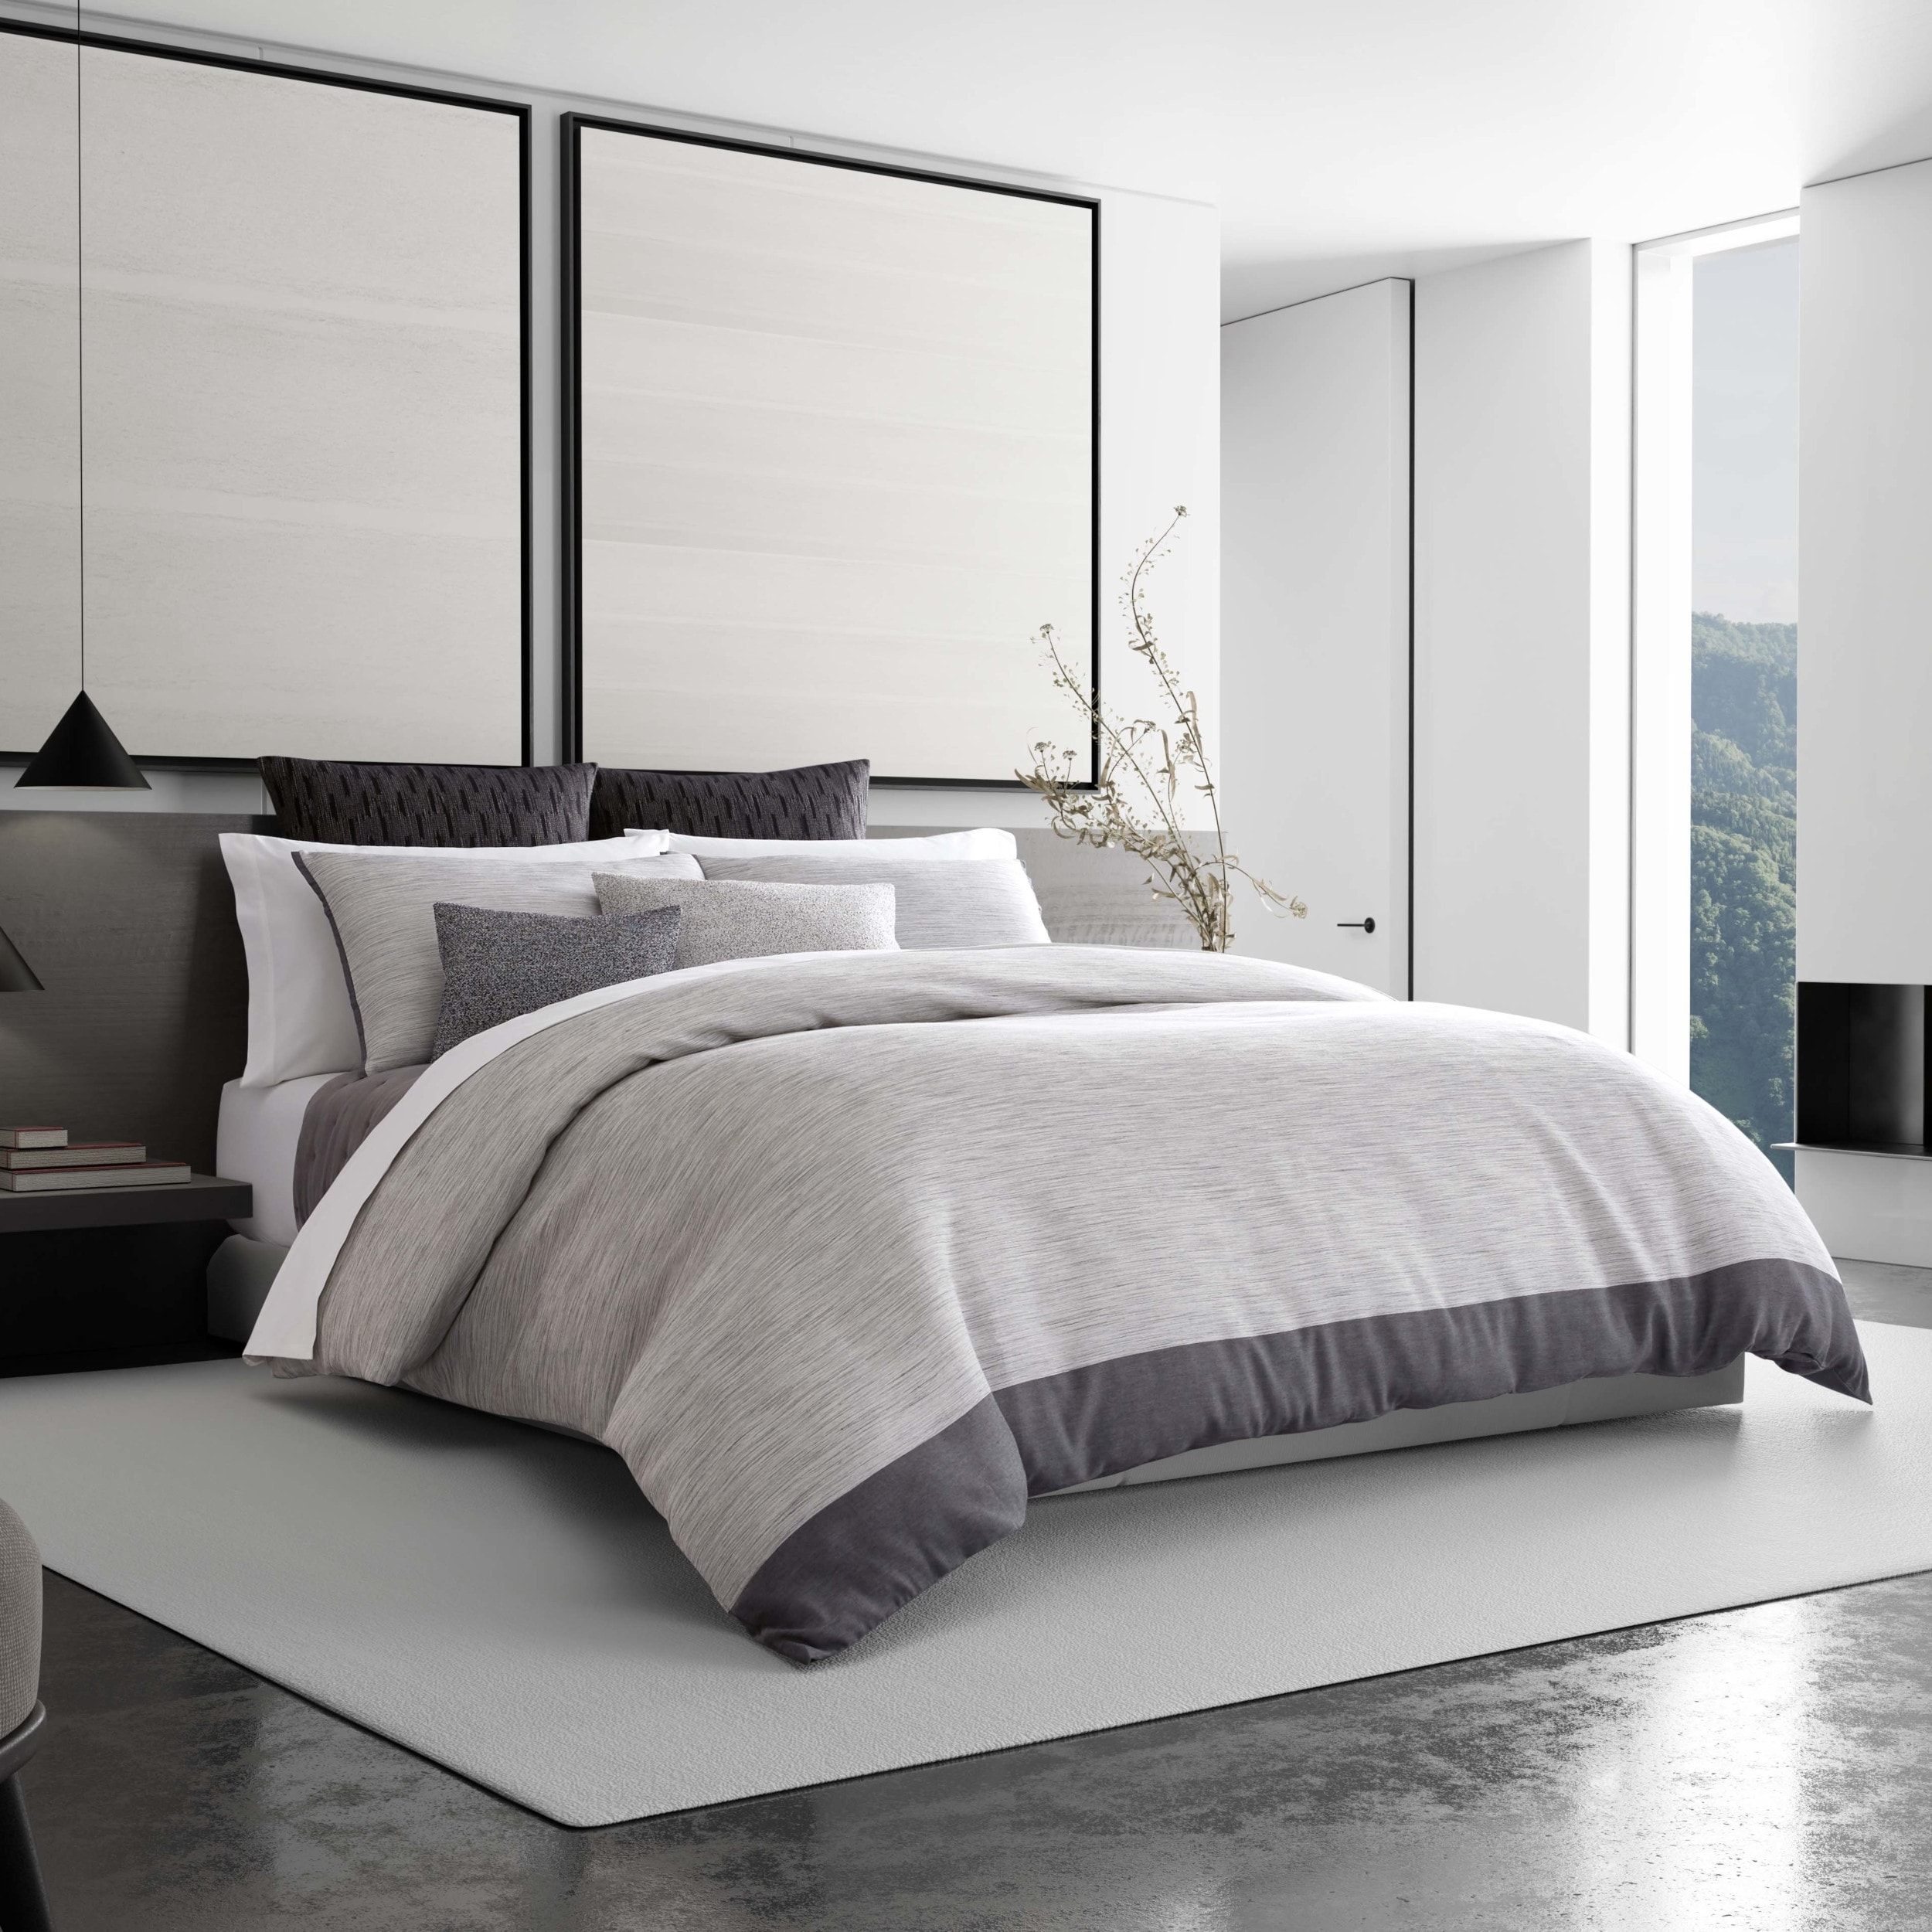 Shop Vera Wang Grisaille Weave Duvet Cover And Coordinating Shams